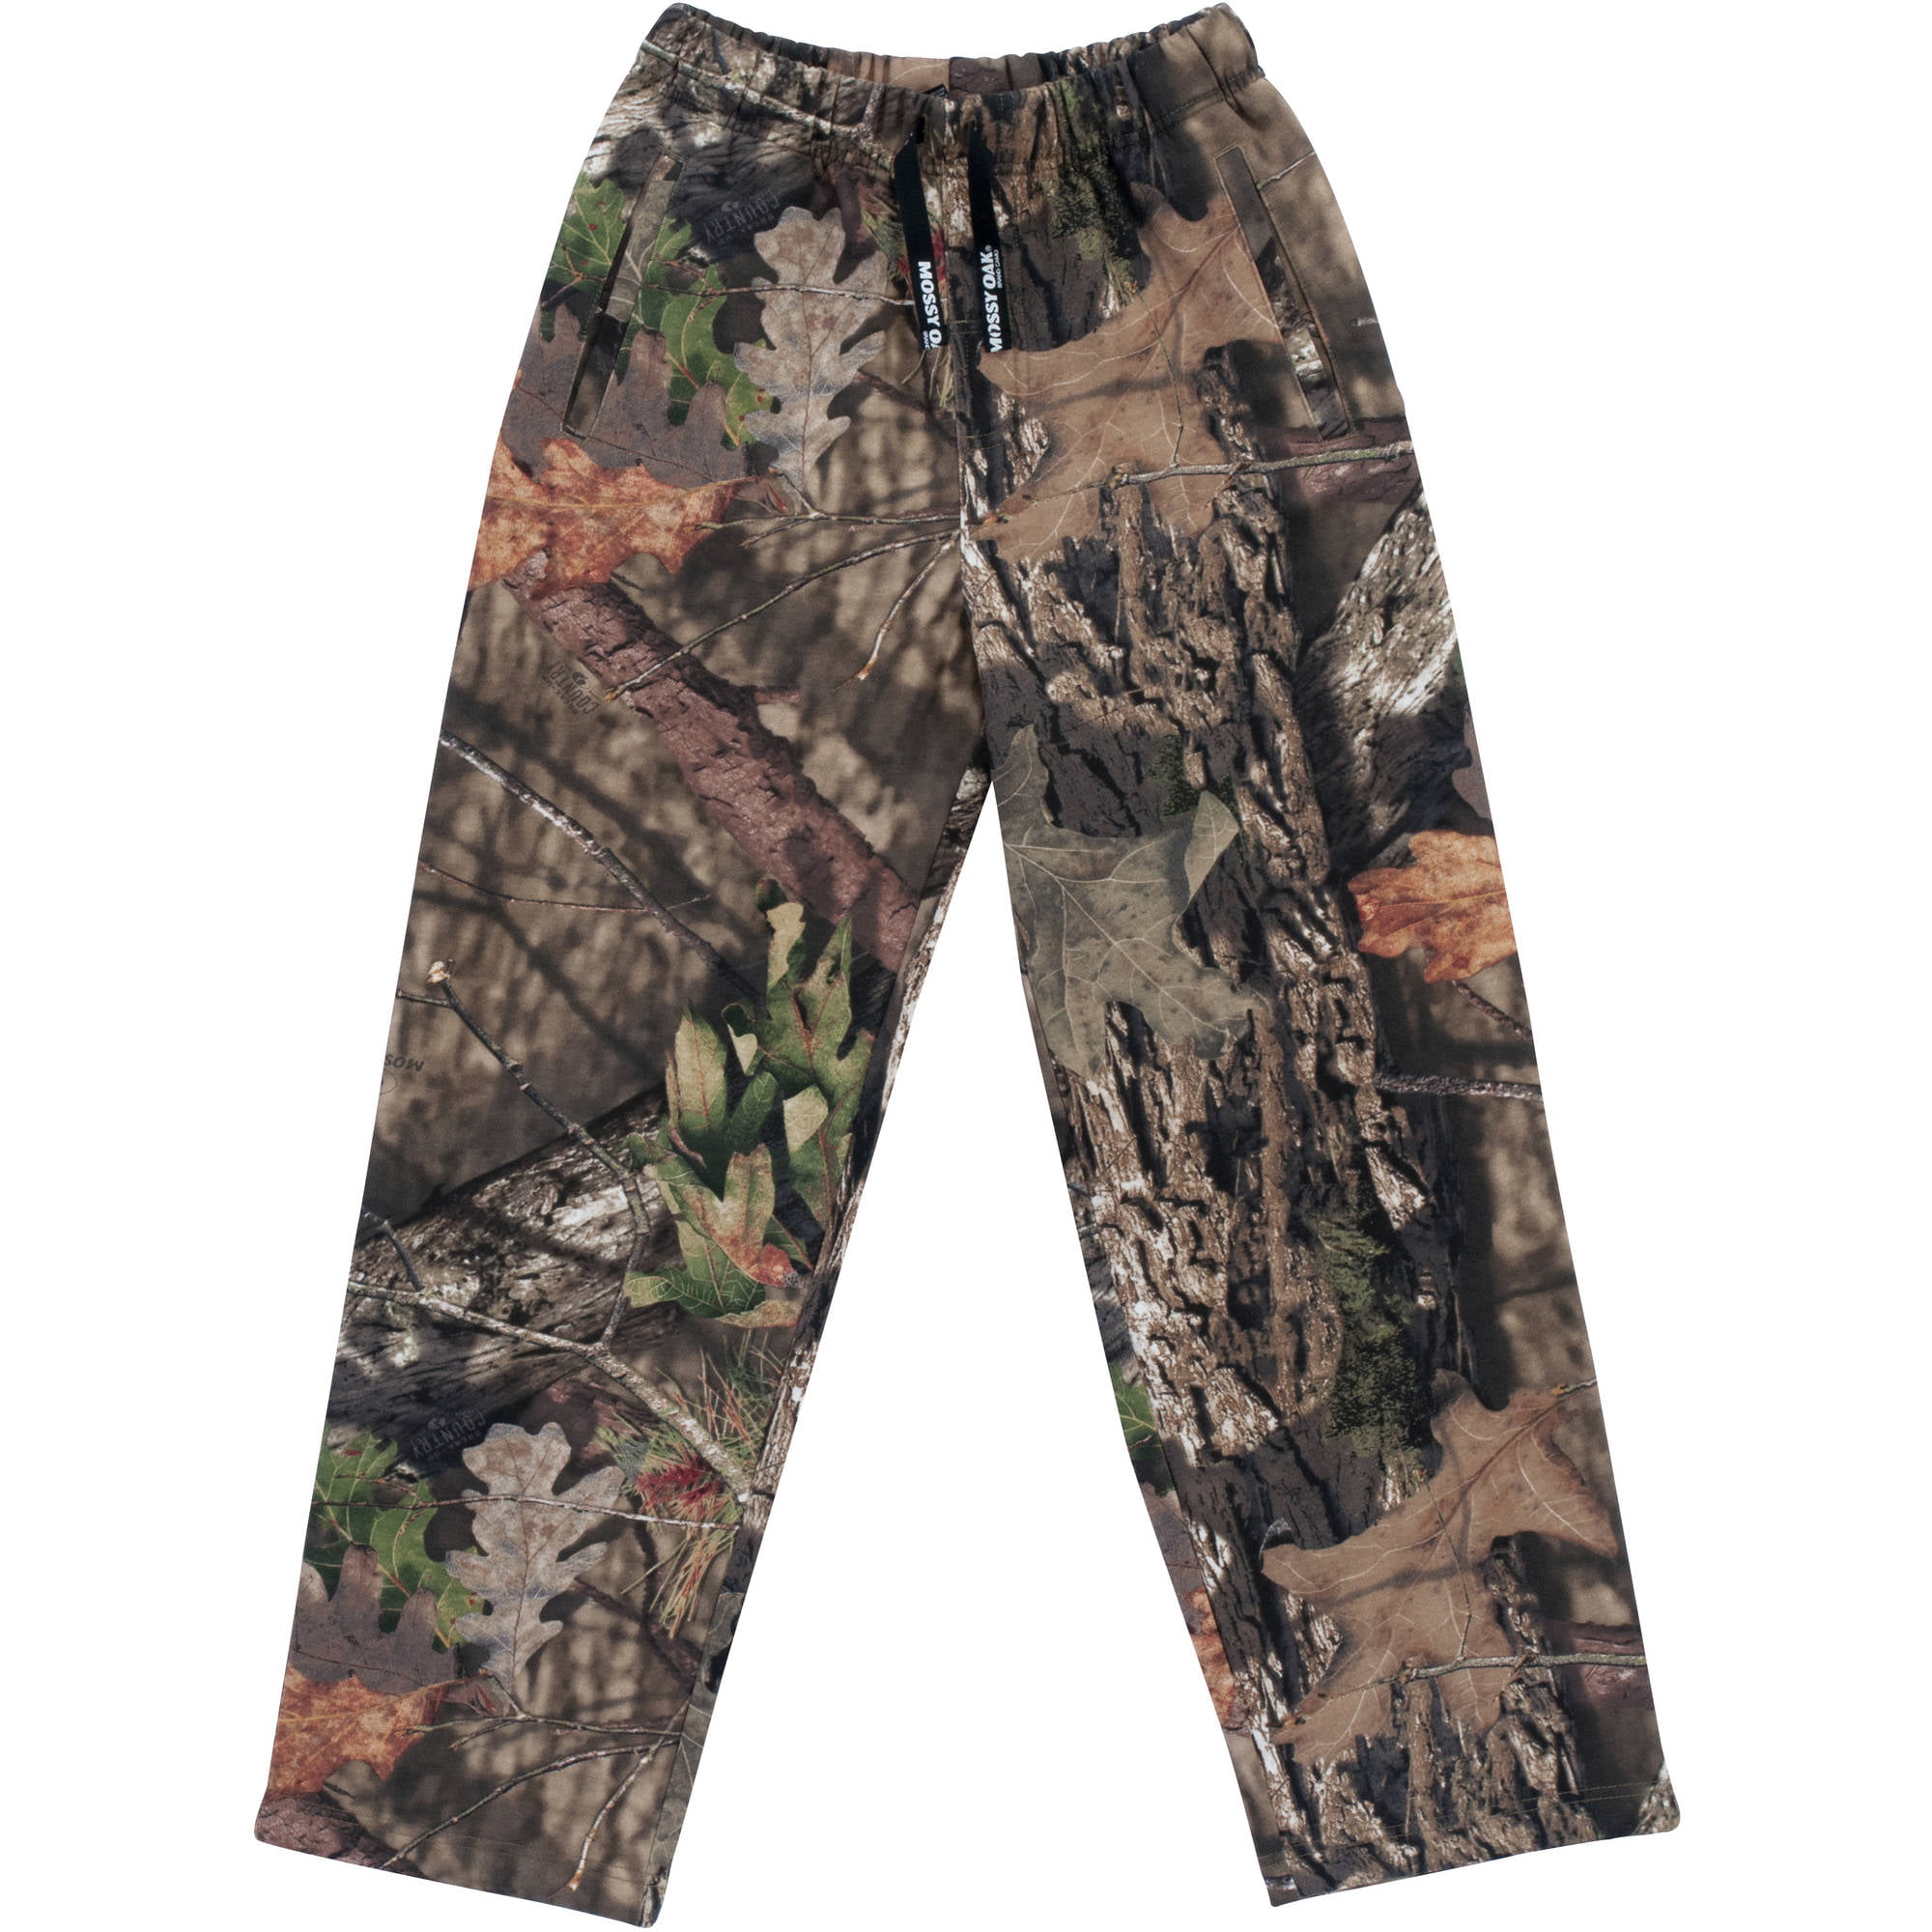 PANTS AGES CHILDREN'S REALTREE CAMOUFLAGE JOGGING BOTTOMS 2-3 to 13-14 YEARS